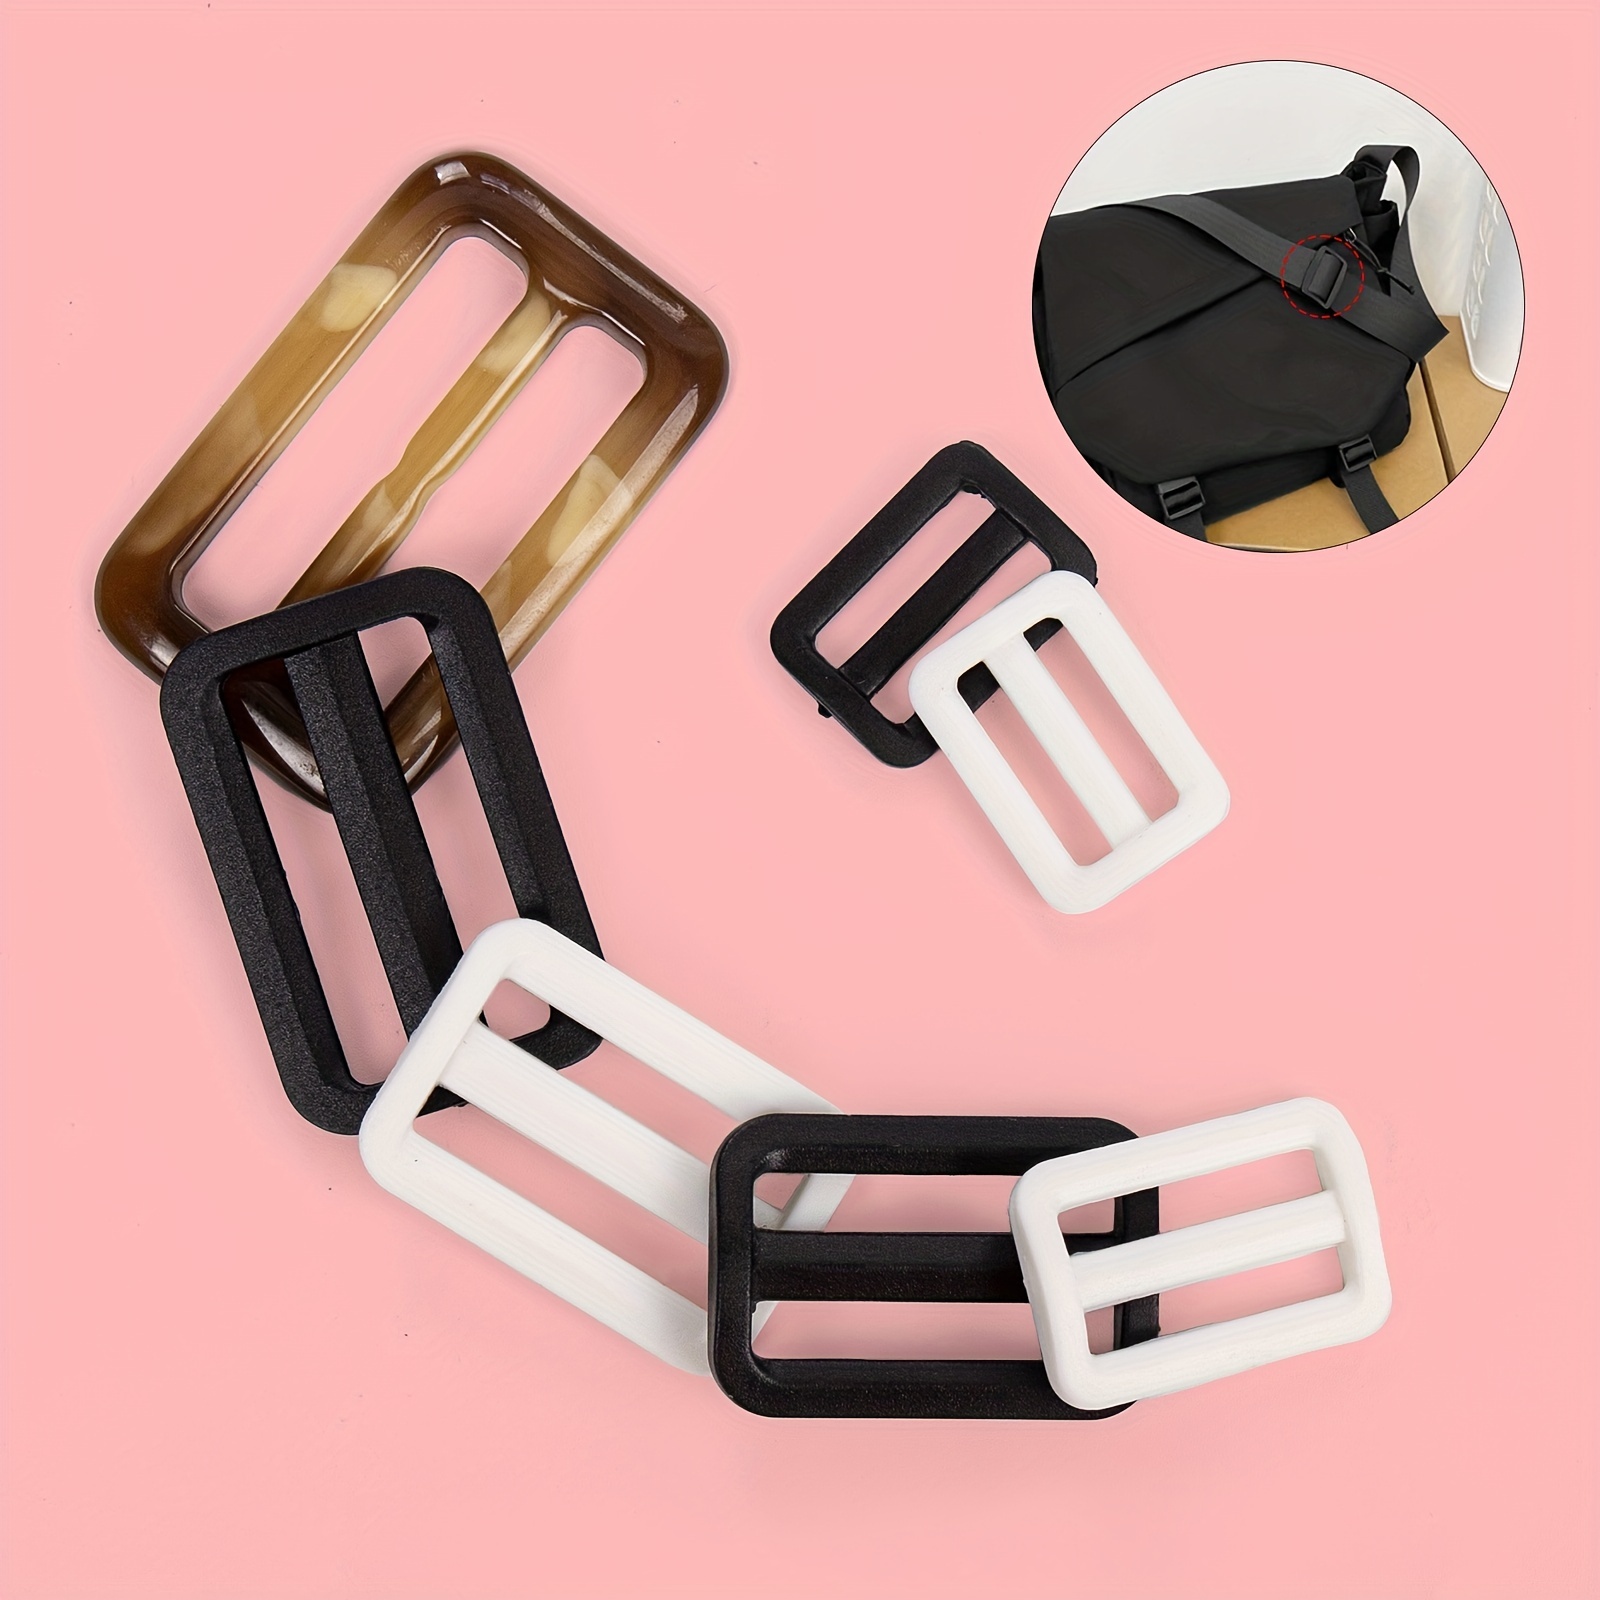 

10pcs Webbing Buckle Bag Backpack Accessory Buckle Plastic Black/white Buckle Sewing Accessories